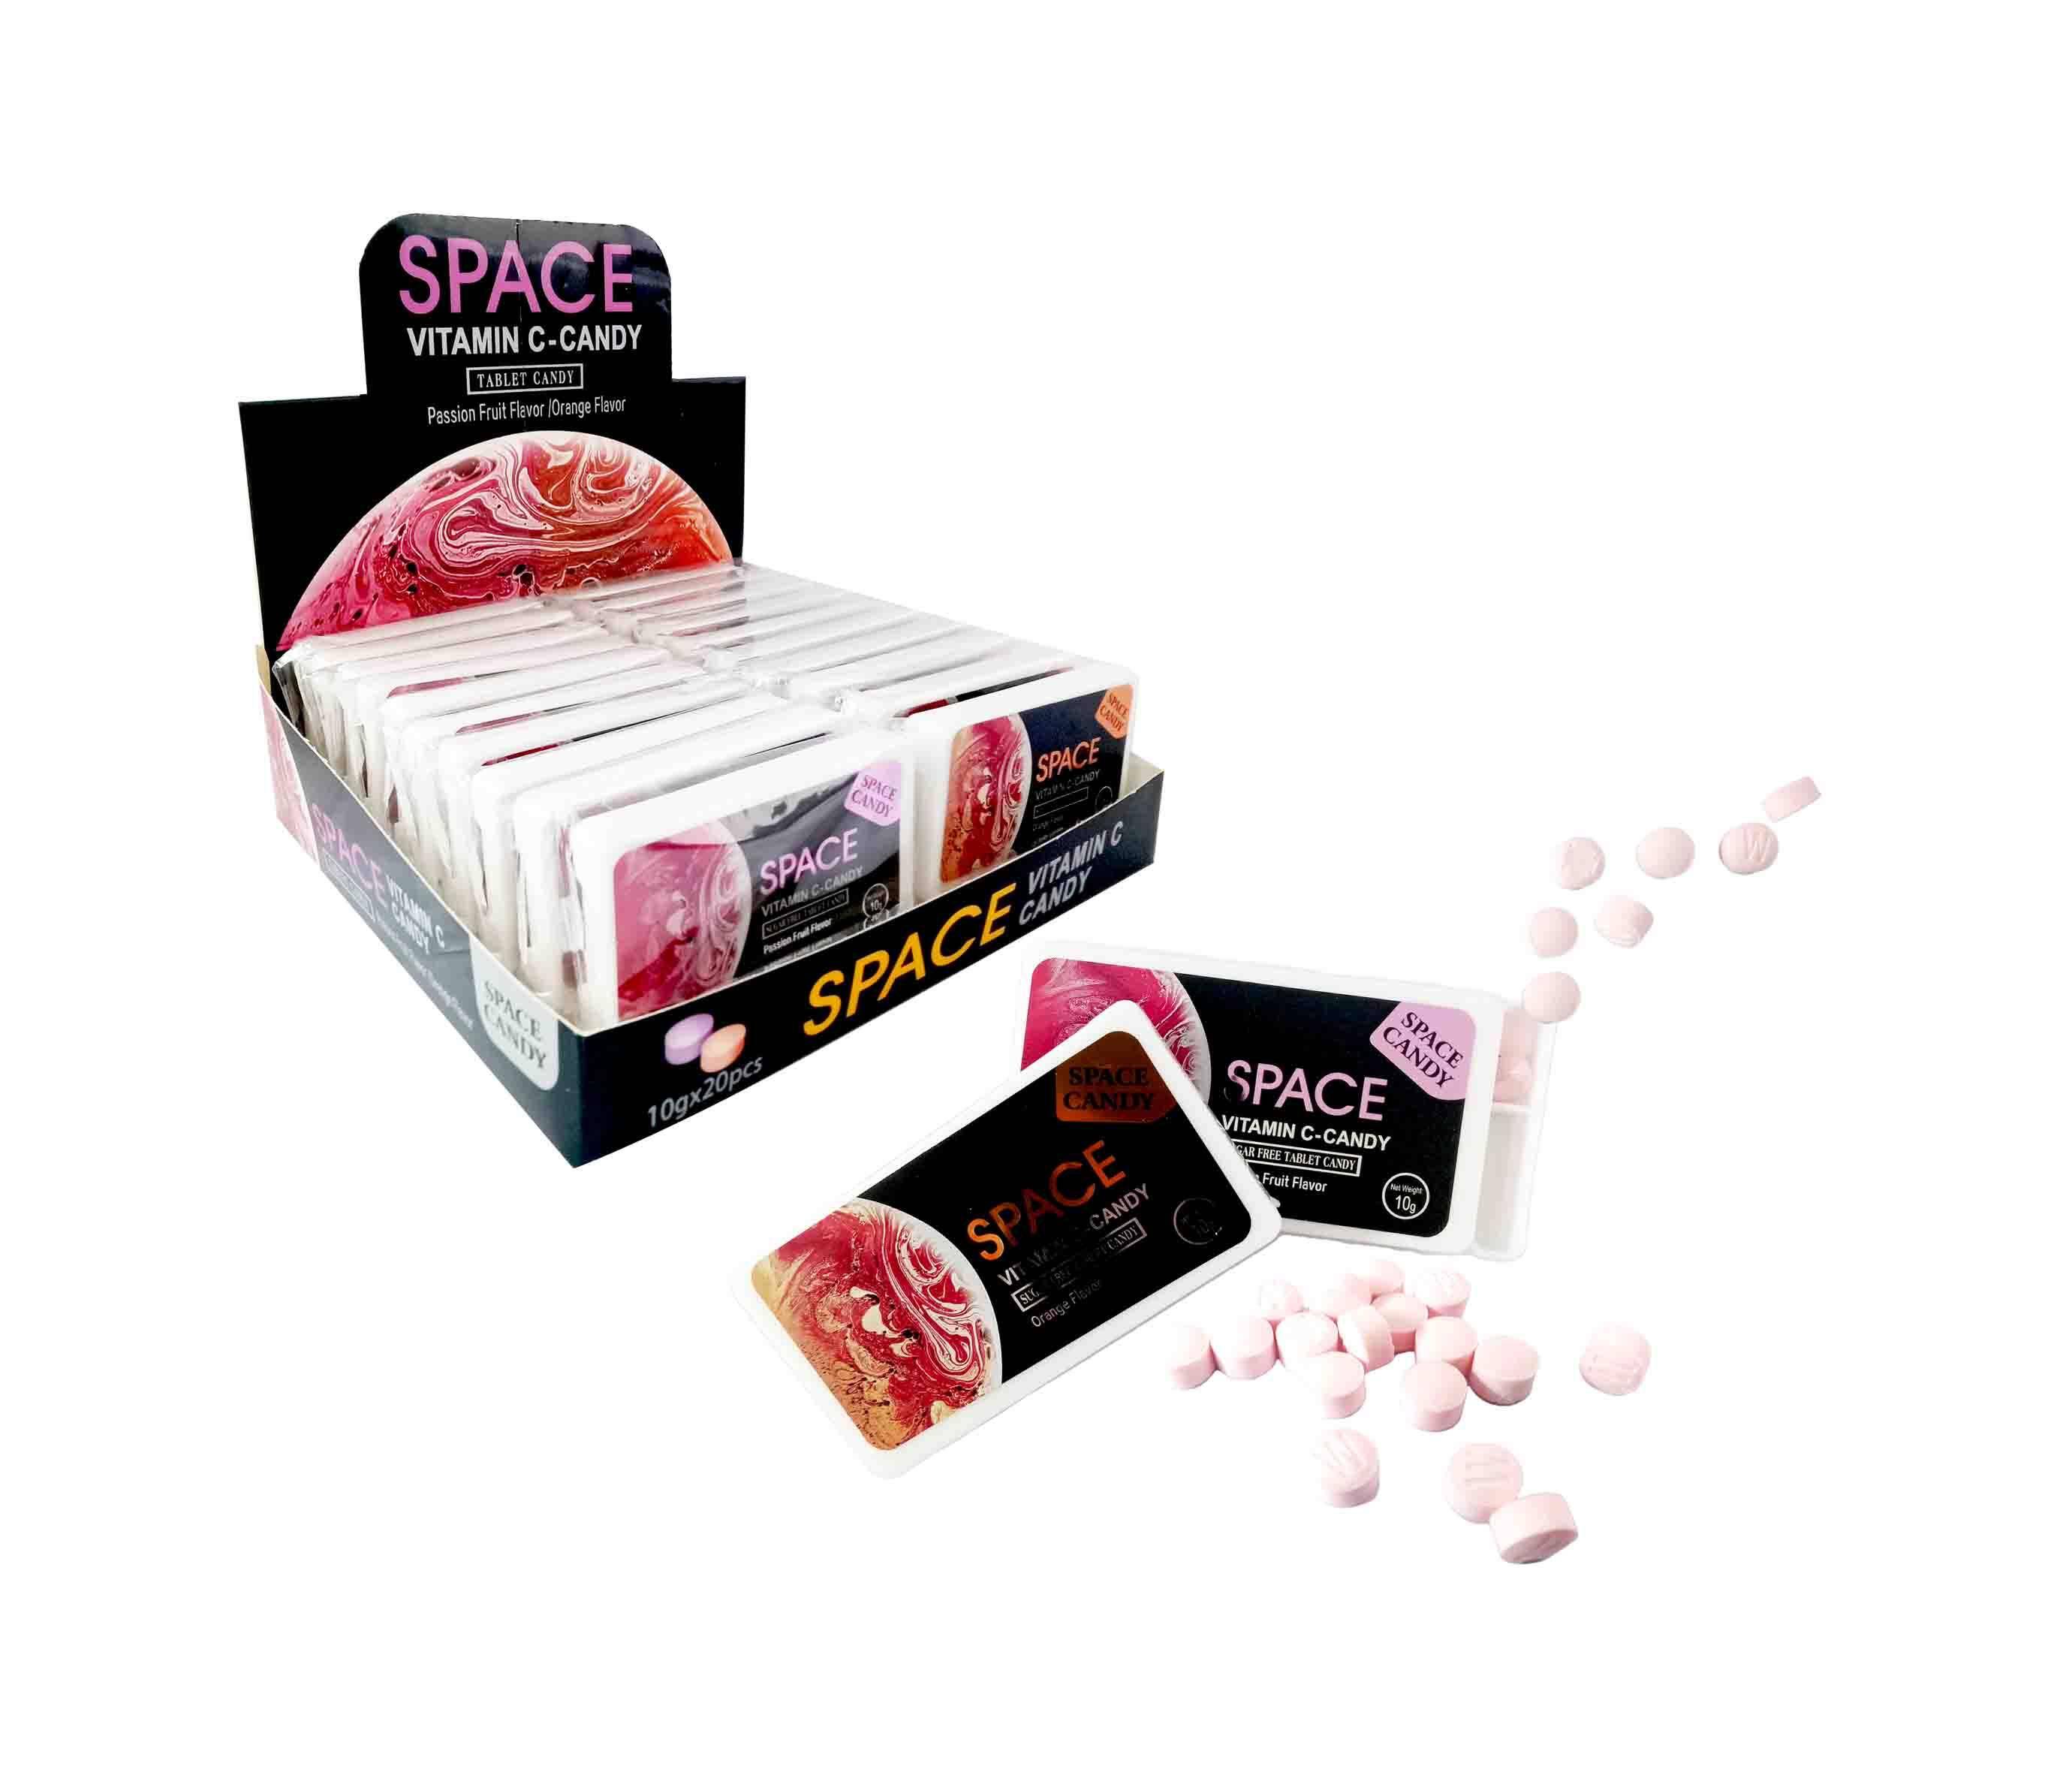 SPACE Vitamin C-CANDY 10g /20/